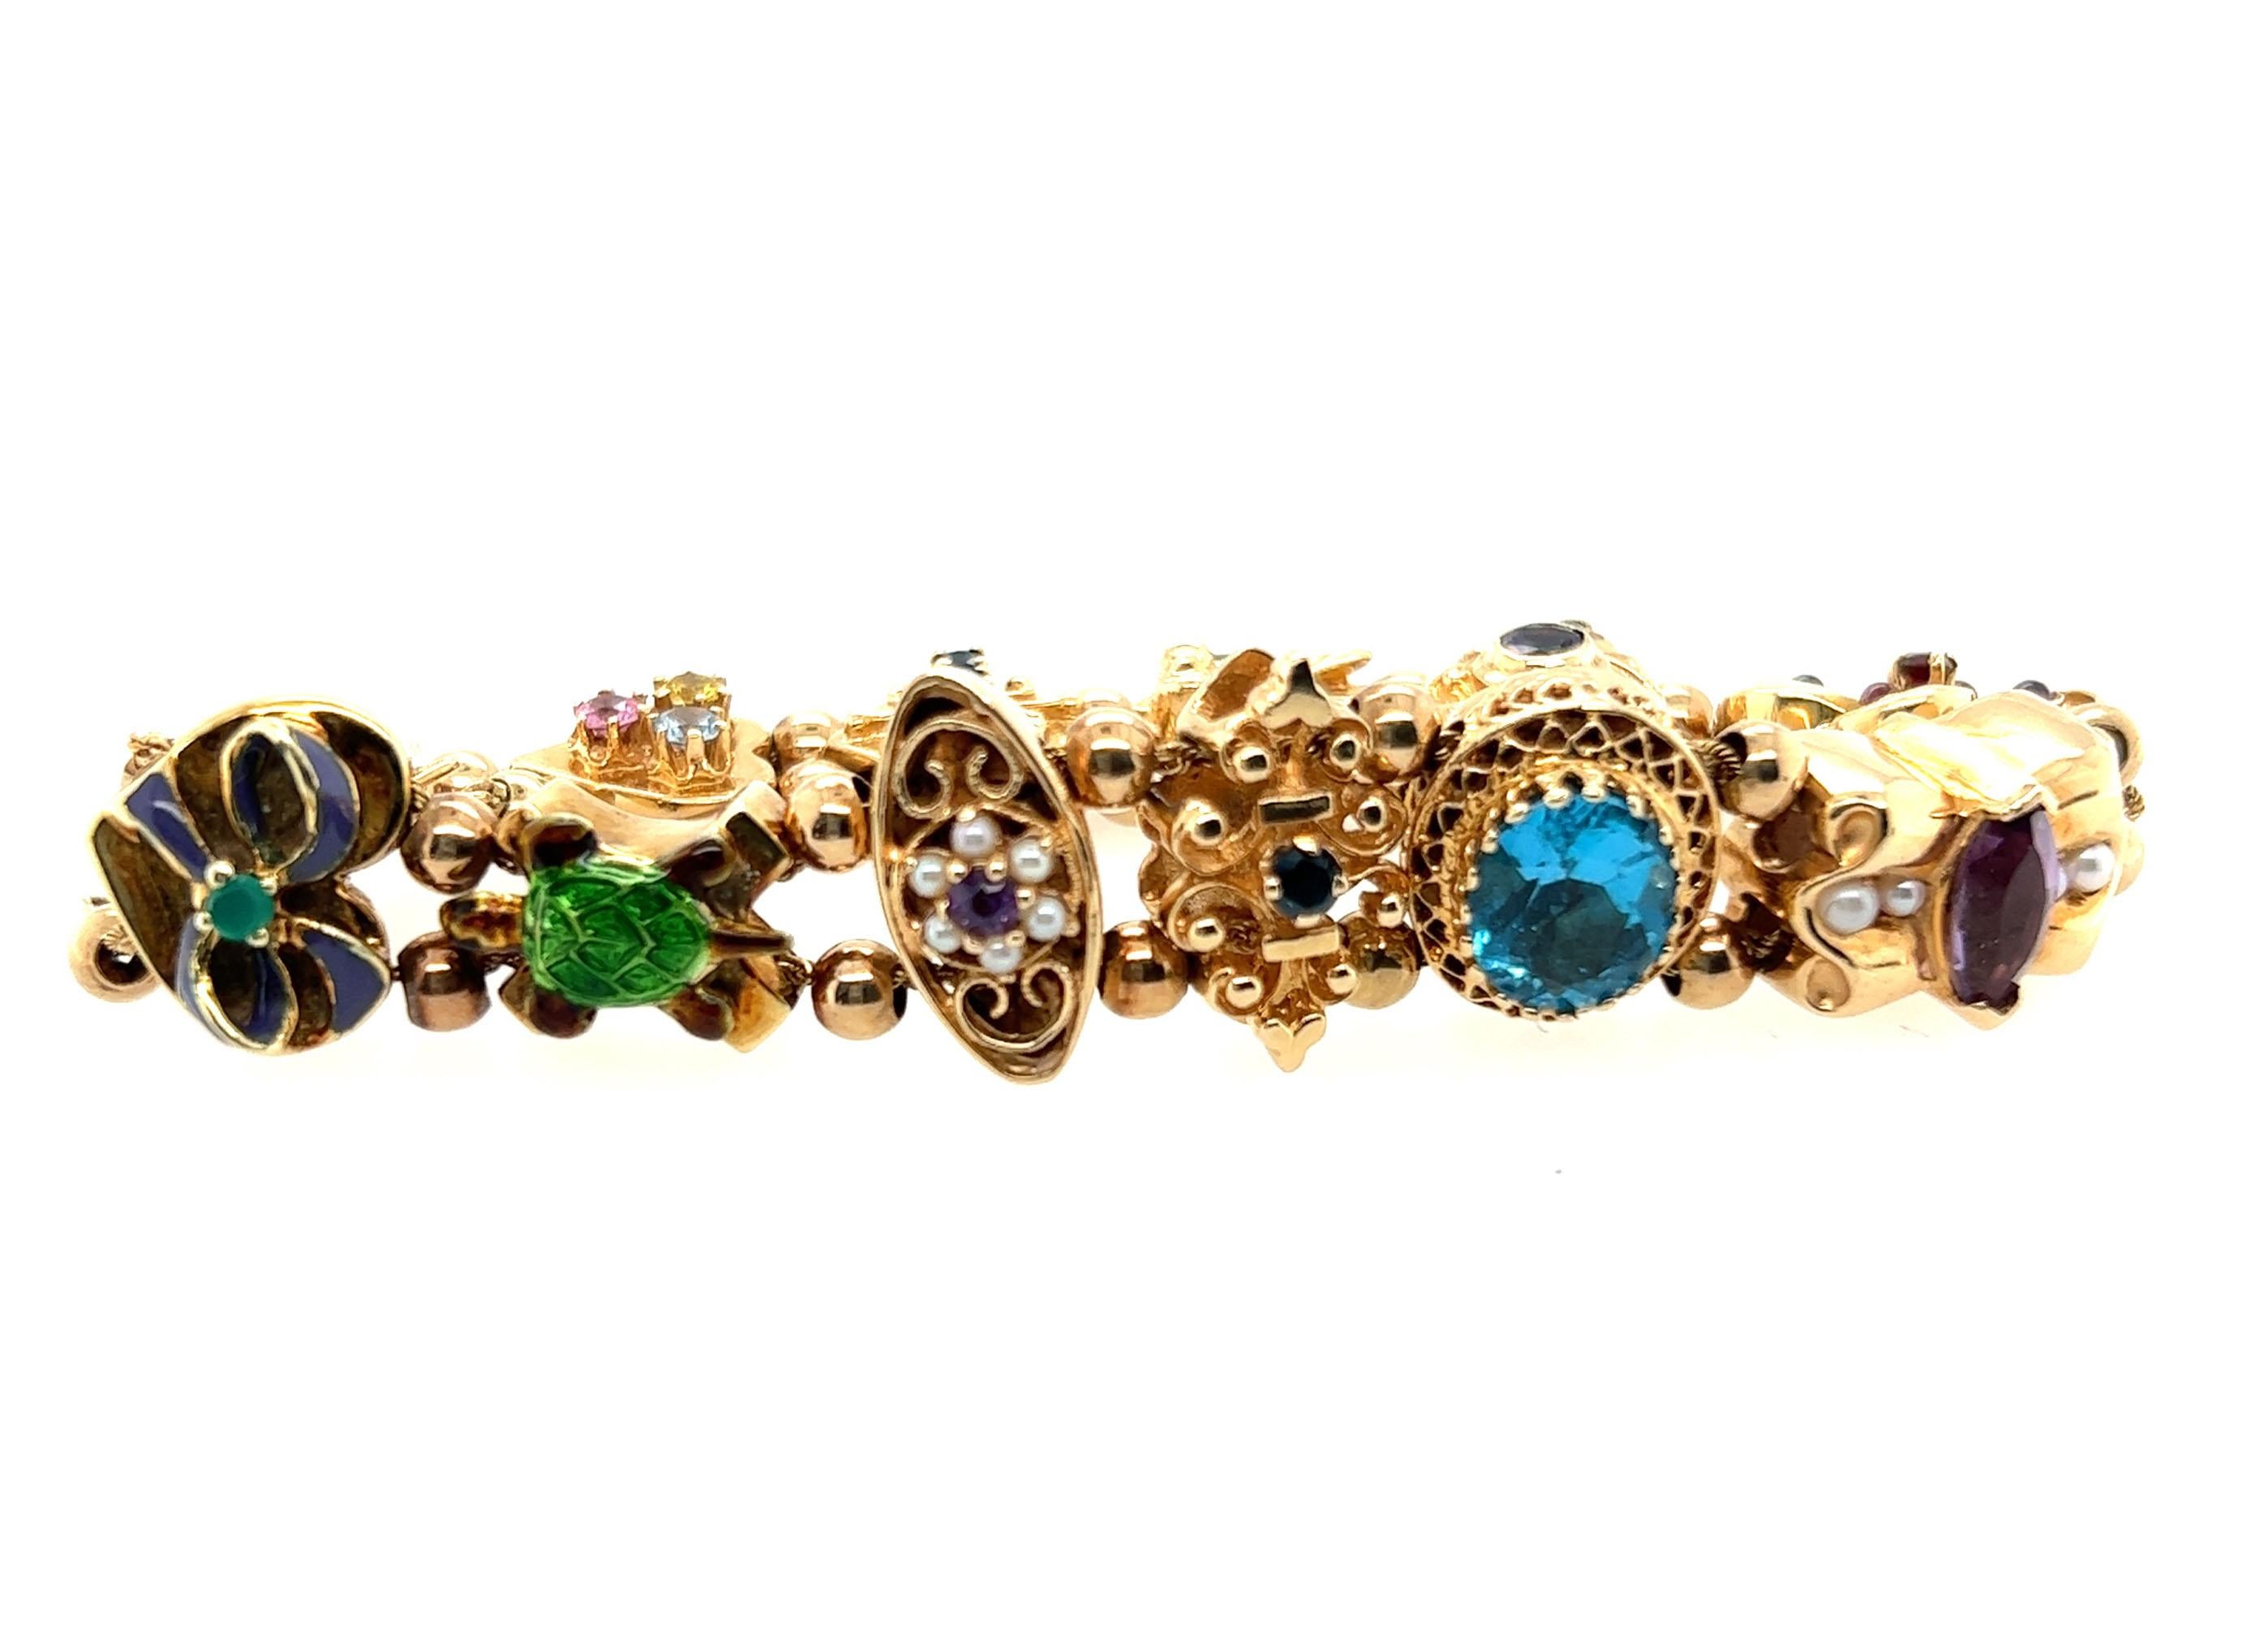 Genuine Original Antique from 1949 Vintage Slide Style Charm Bracelet 14K Yellow Gold Retro



Features Multi Colored Gemstones

This Bracelet Weighs a HEAVY 35.5 Grams

That's Over $1,250  in Gold Value Alone

Intricate Hand Carved Charms

Bow,